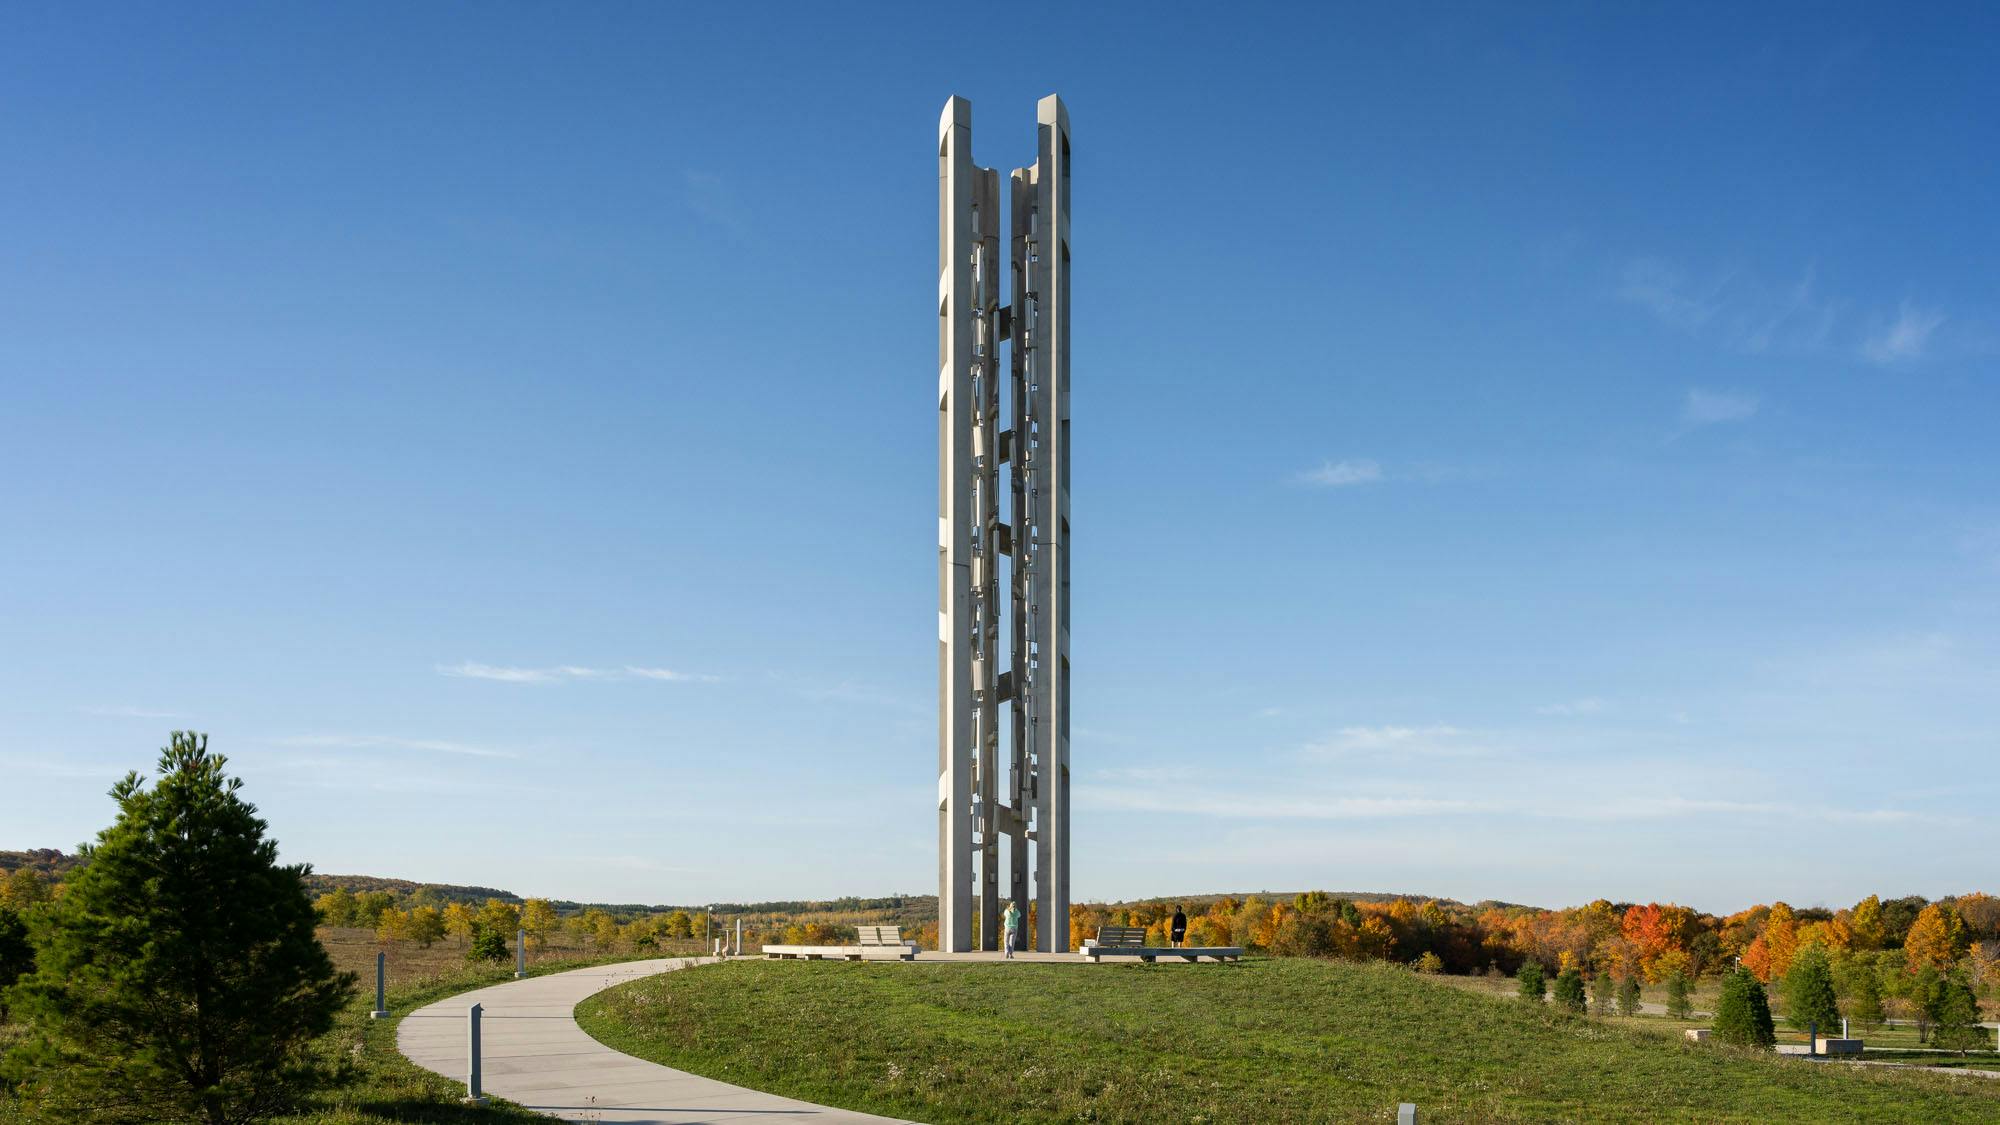 The 93-foot tower stands as a beacon at the gateway to the park.